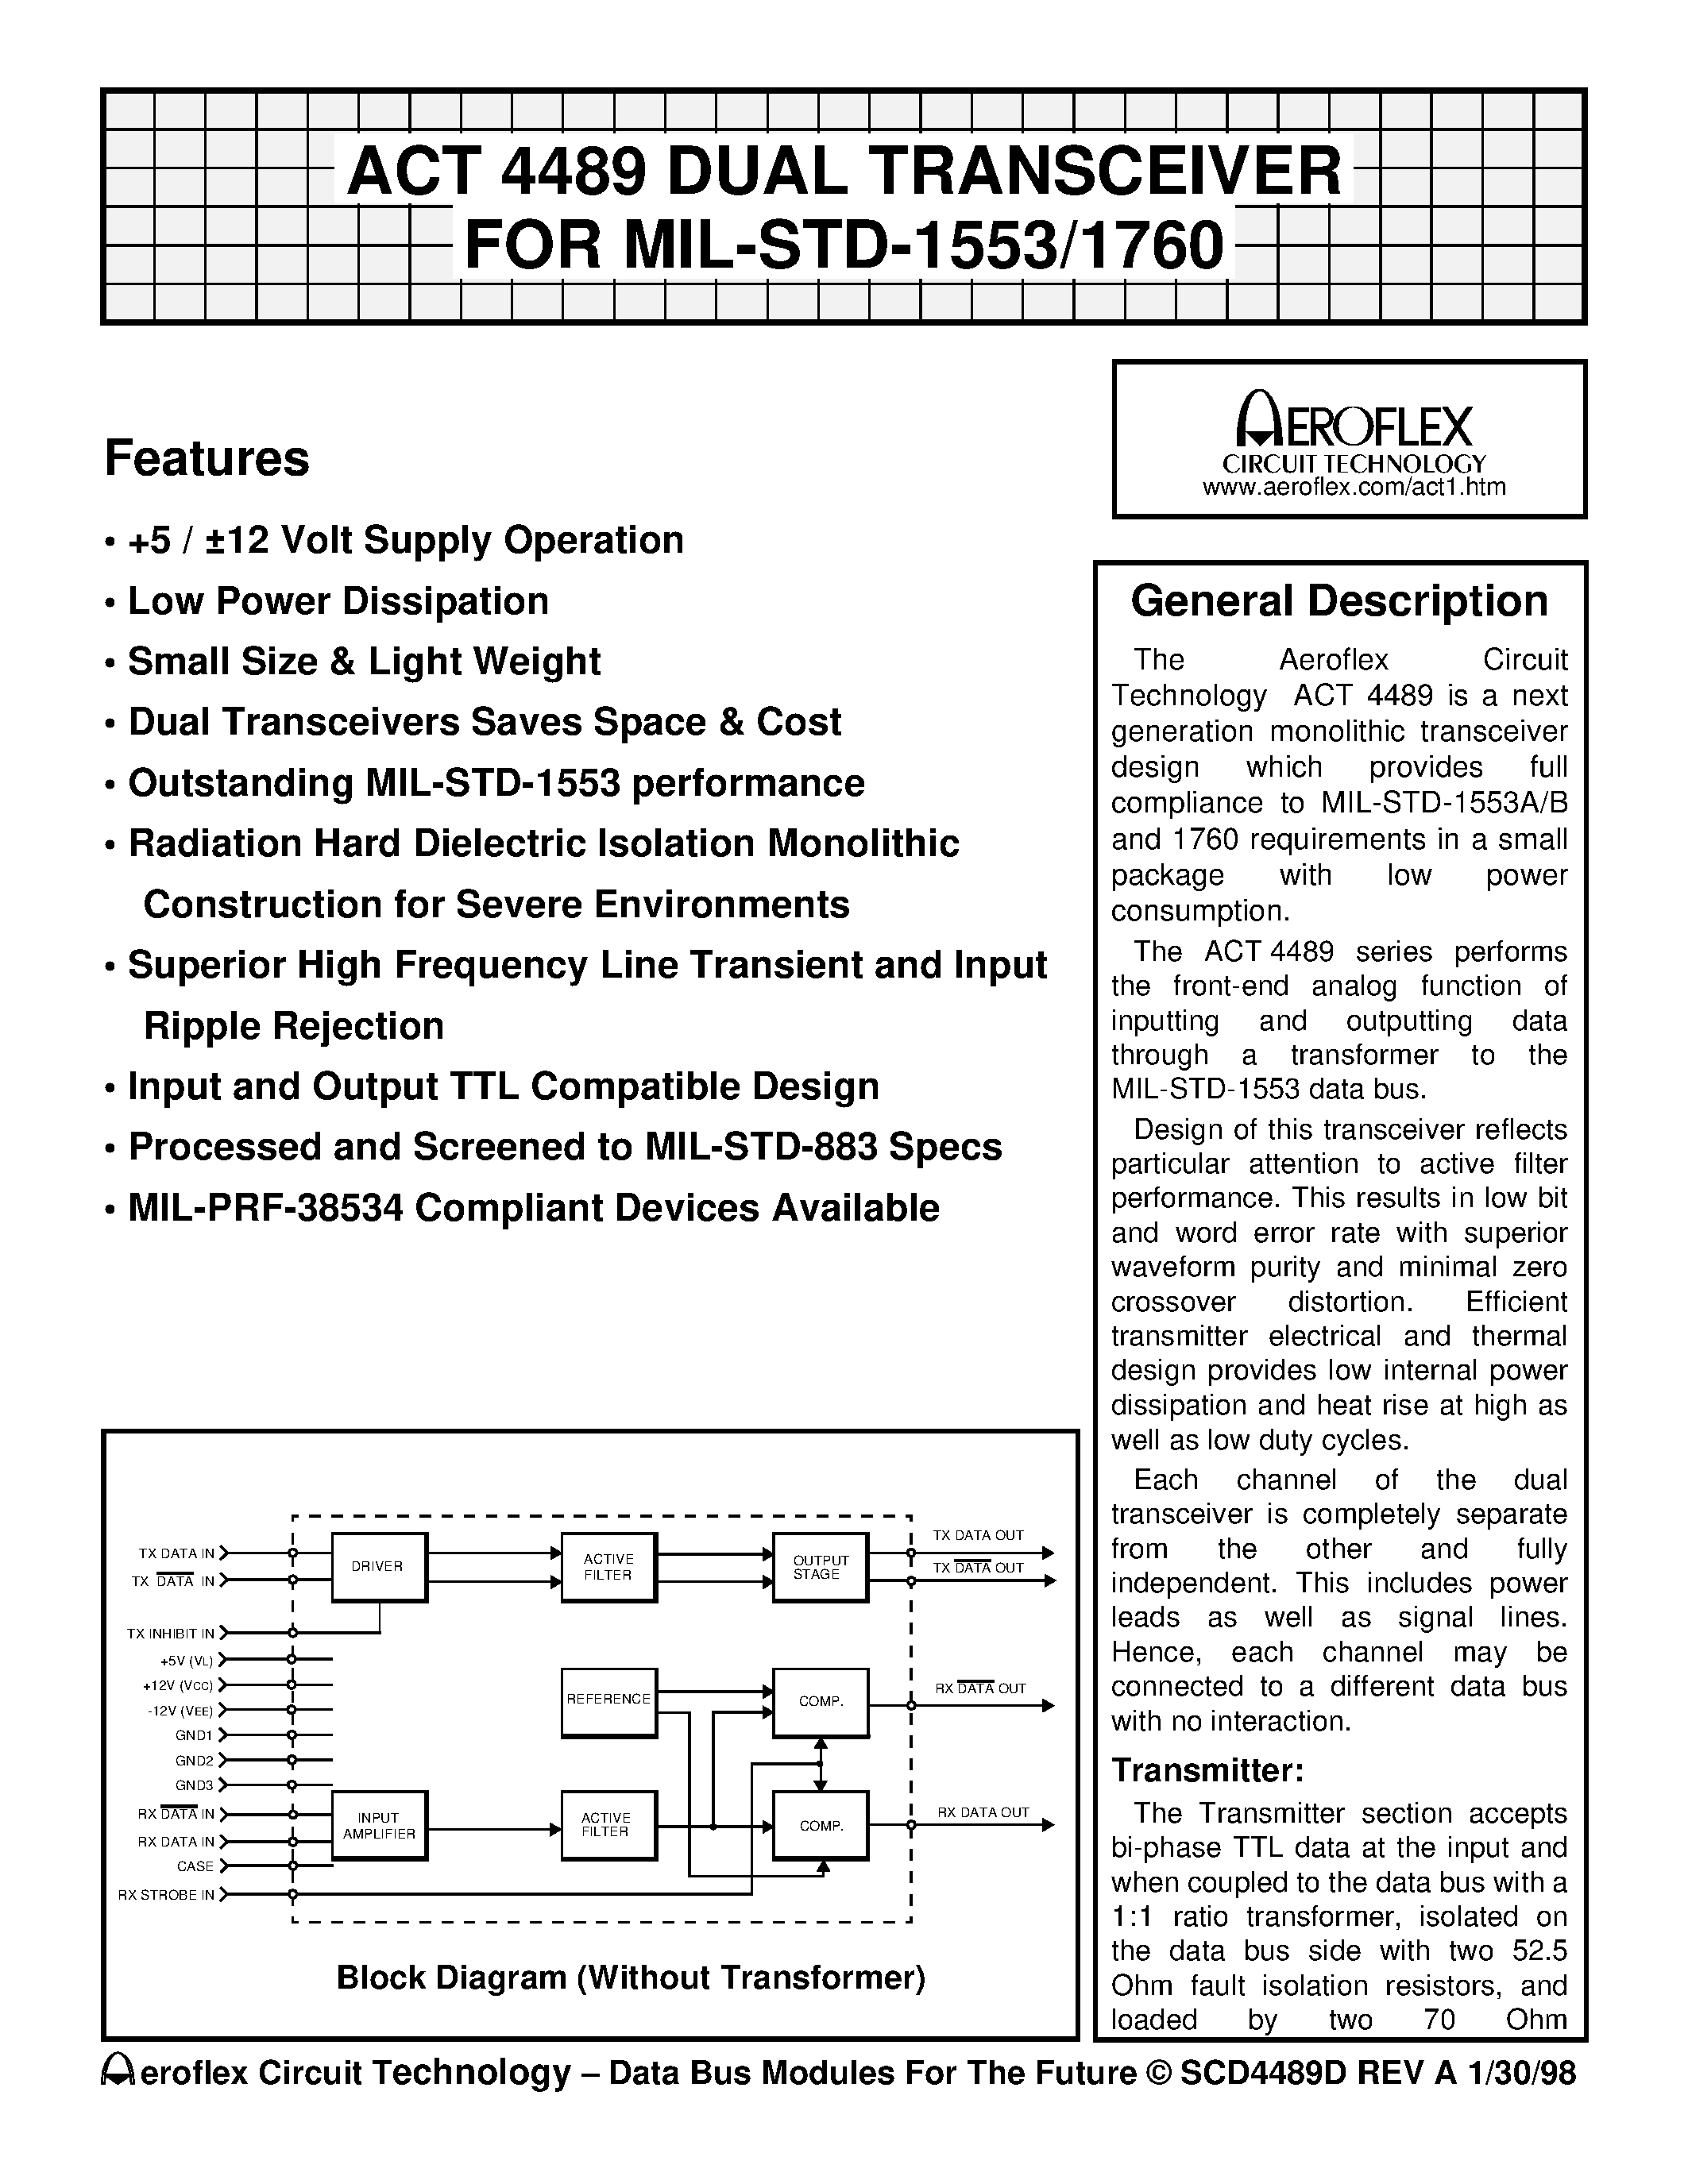 Datasheet ACT4489111111 - ACT 4489 DUAL TRANSCEIVER FOR MIL-STD-1553/1760 page 1